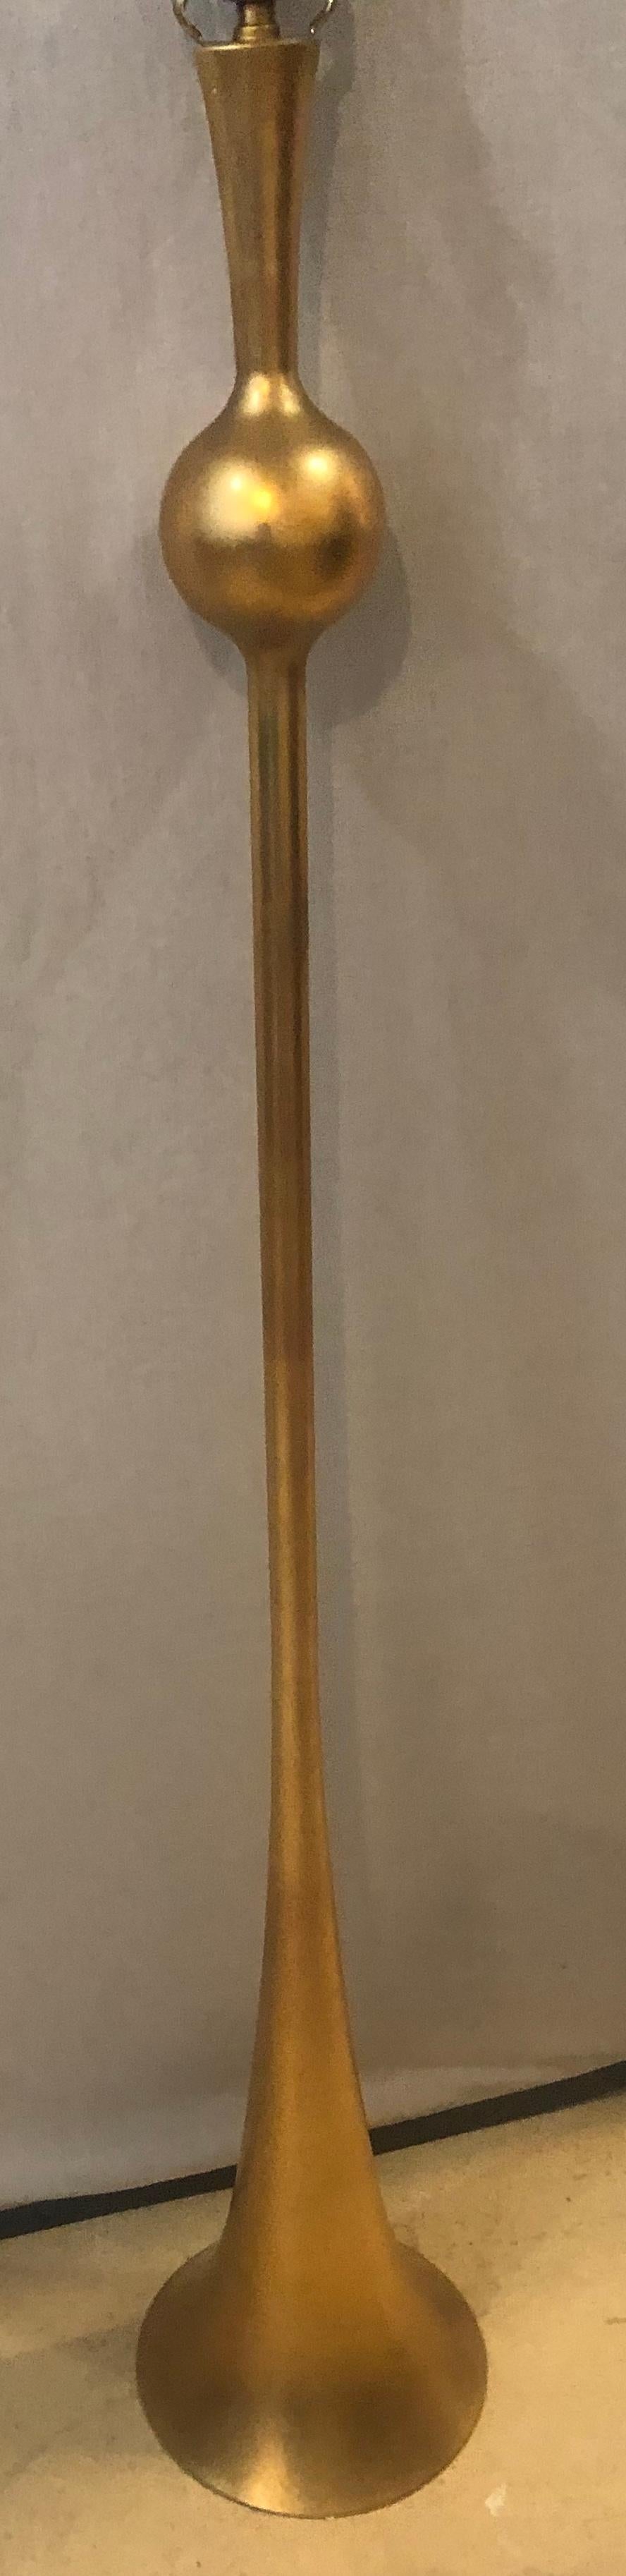 Gilt Metal Hollywood Regency Style Trumpet Standing or Tall Floor Lamp In Good Condition For Sale In Stamford, CT